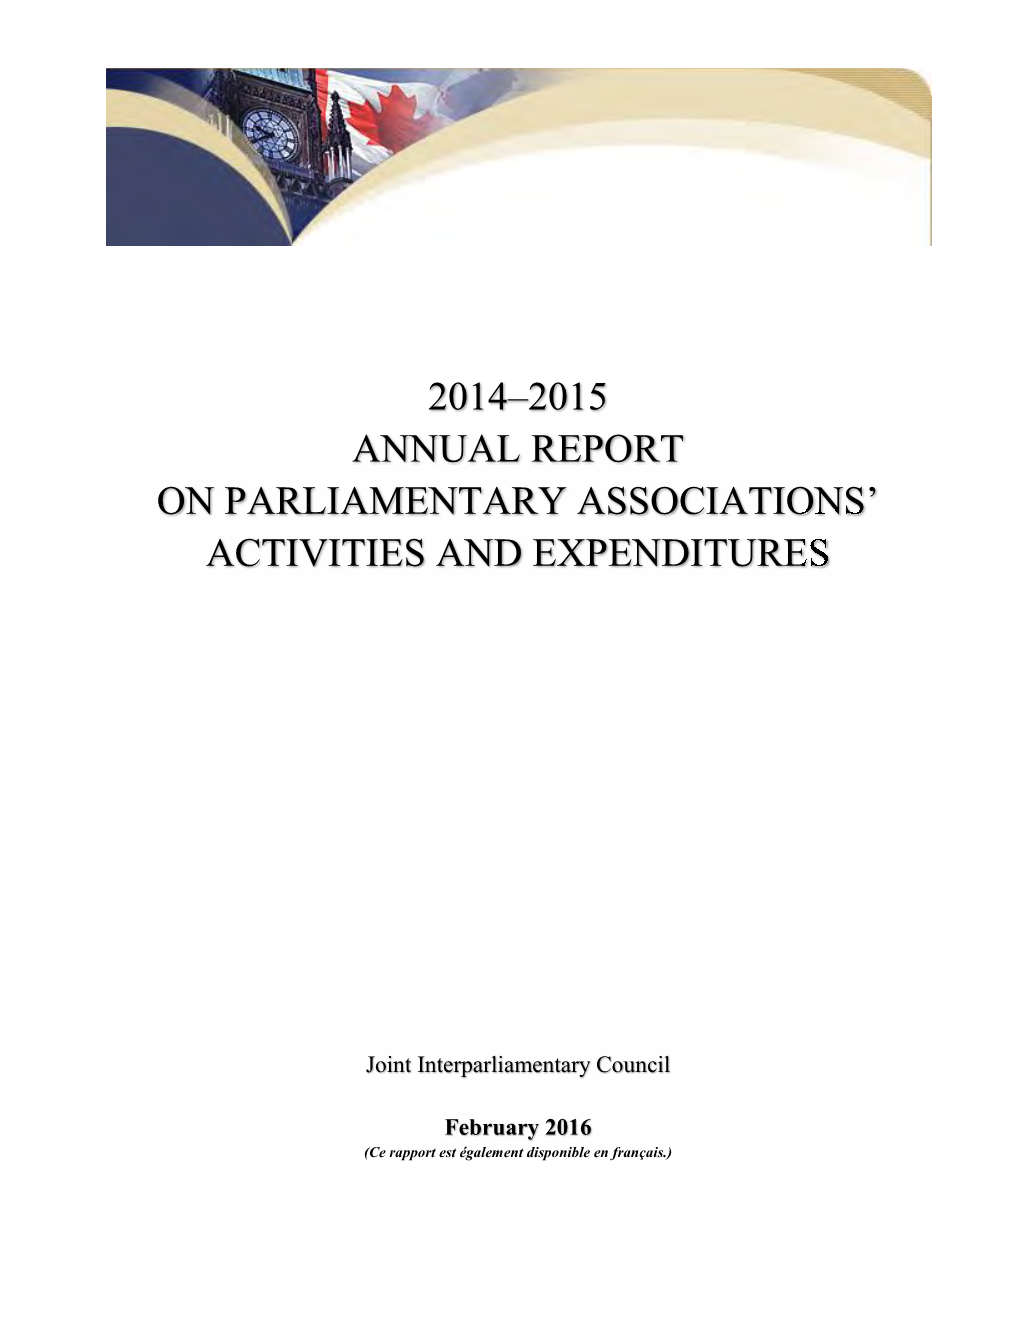 2014–2015 Annual Report on Parliamentary Associations’ Activities and Expenditures